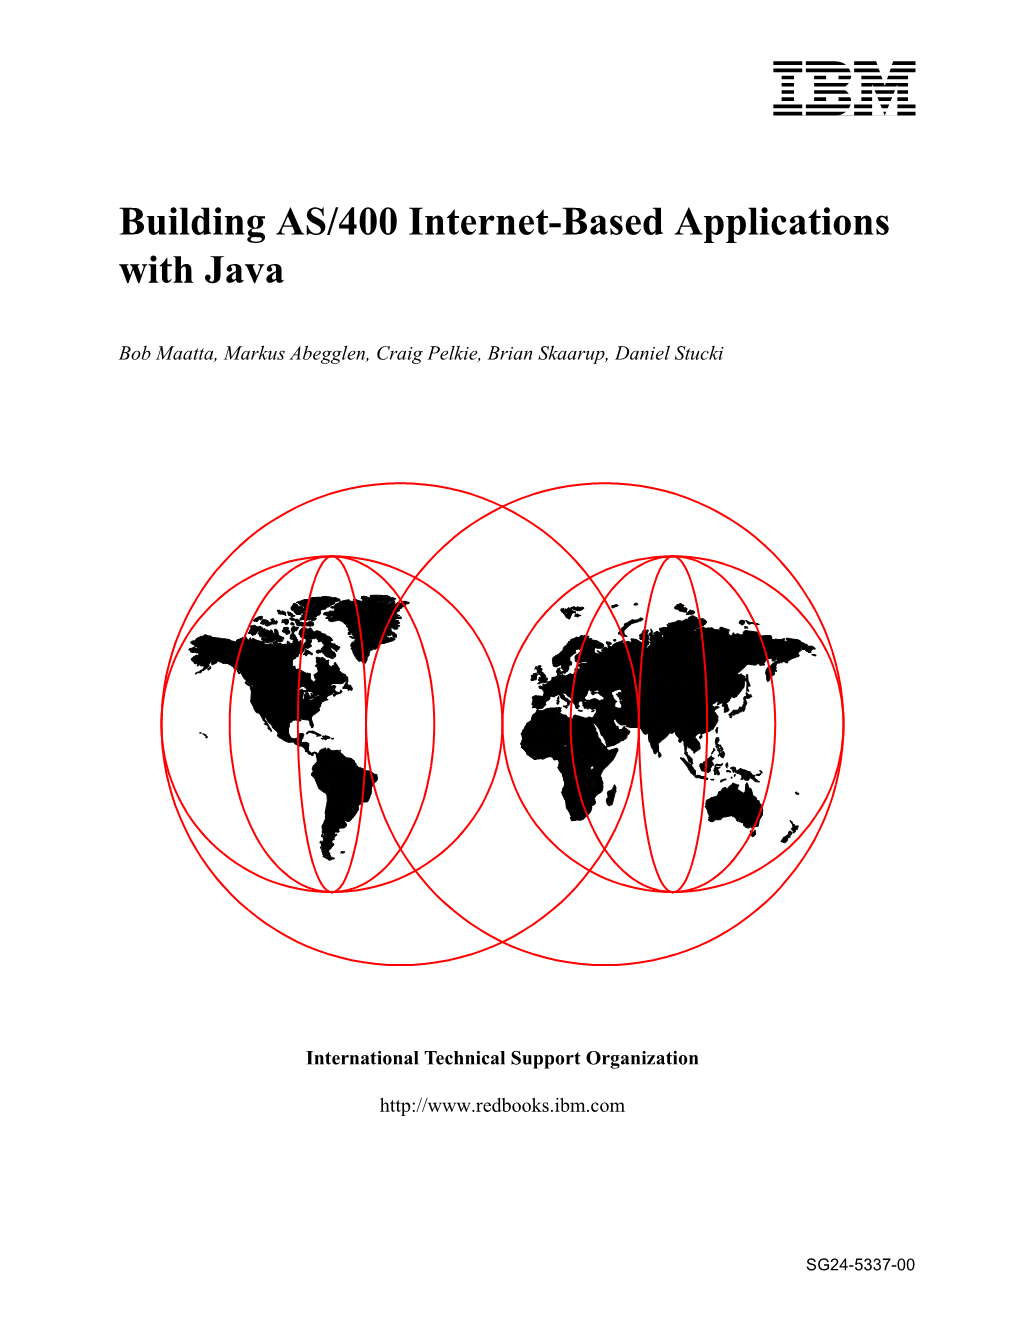 Building AS/400 Internet-Based Applications with Java